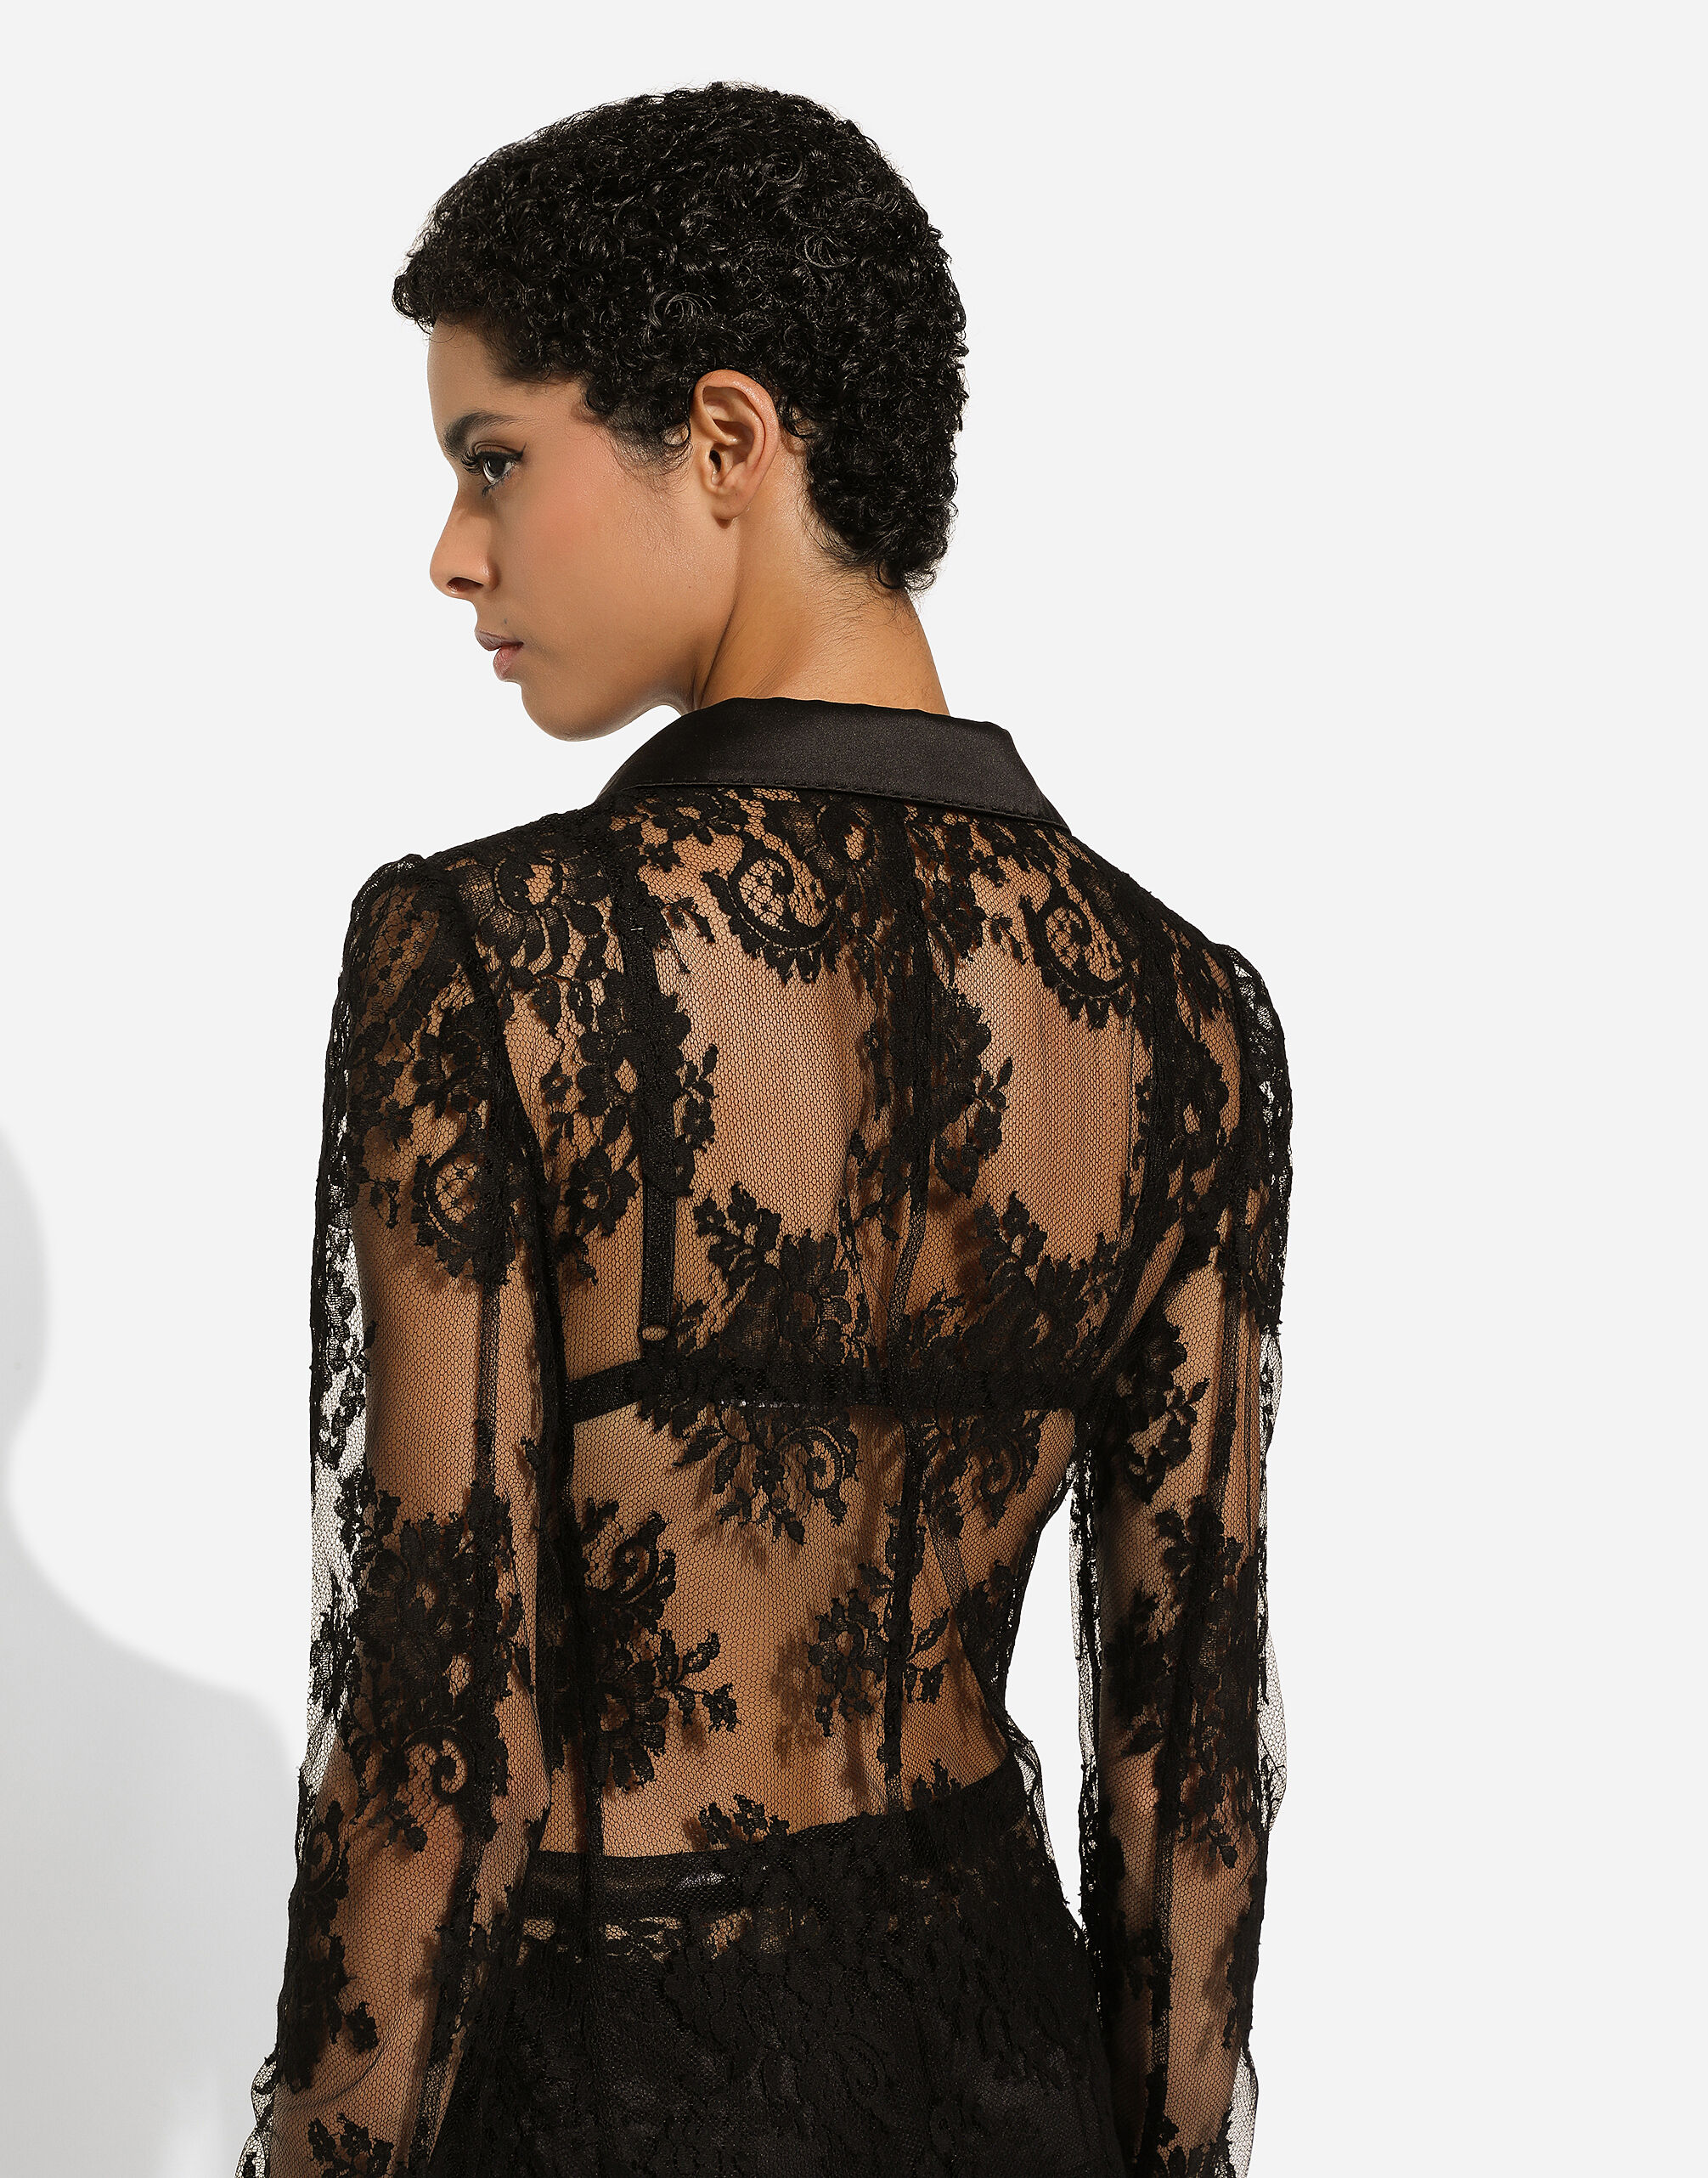 Floral lace jacket with satin details in Black for Women 